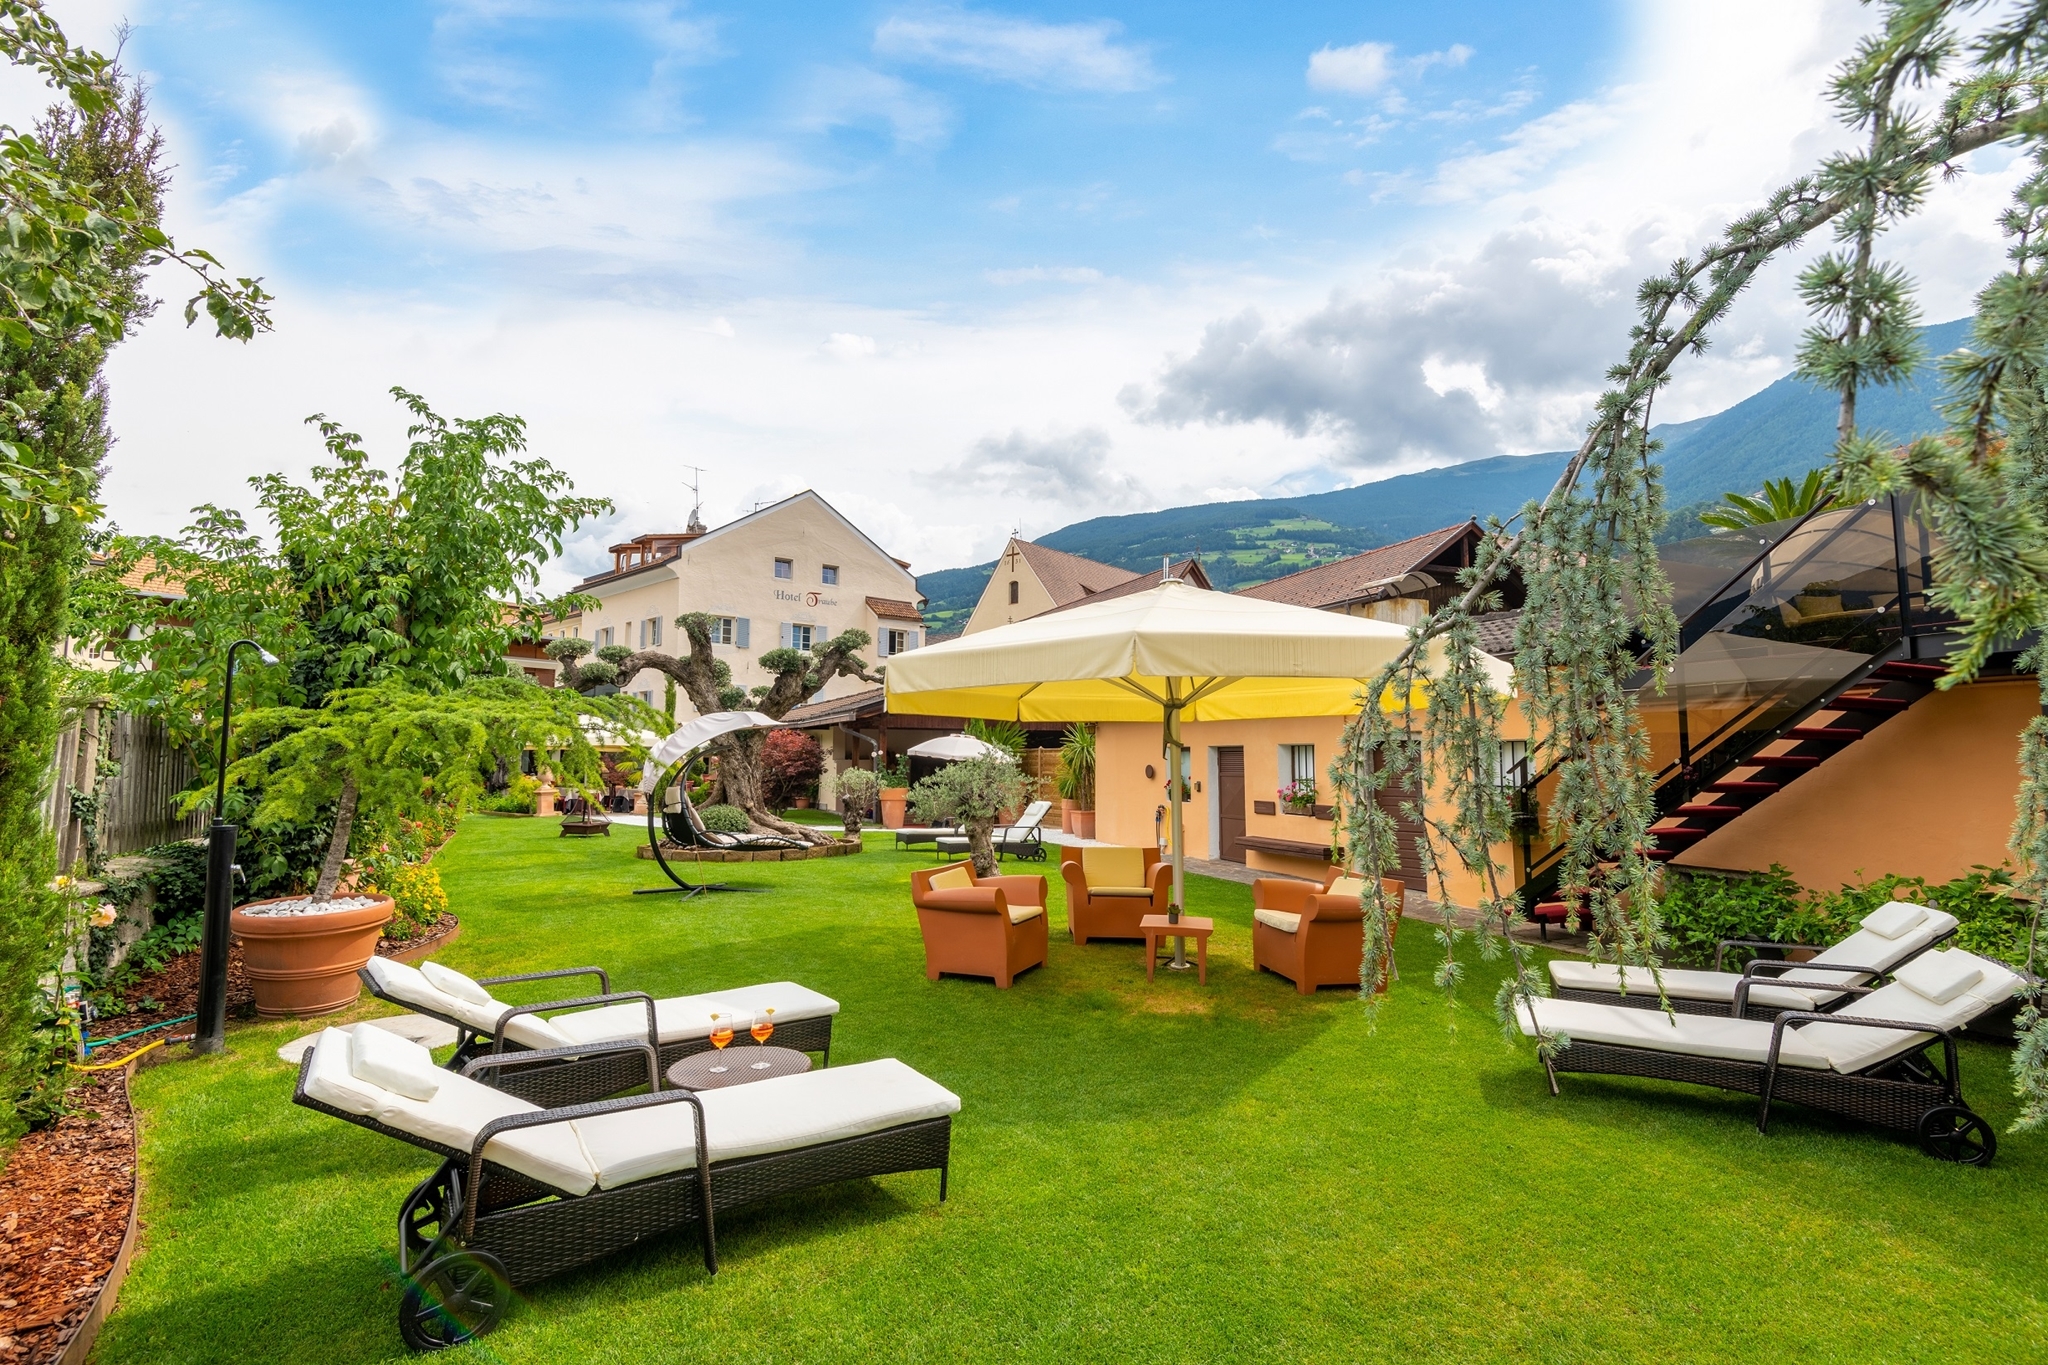 Hotel & Appartements Traube - Bressanone in Valle Isarco